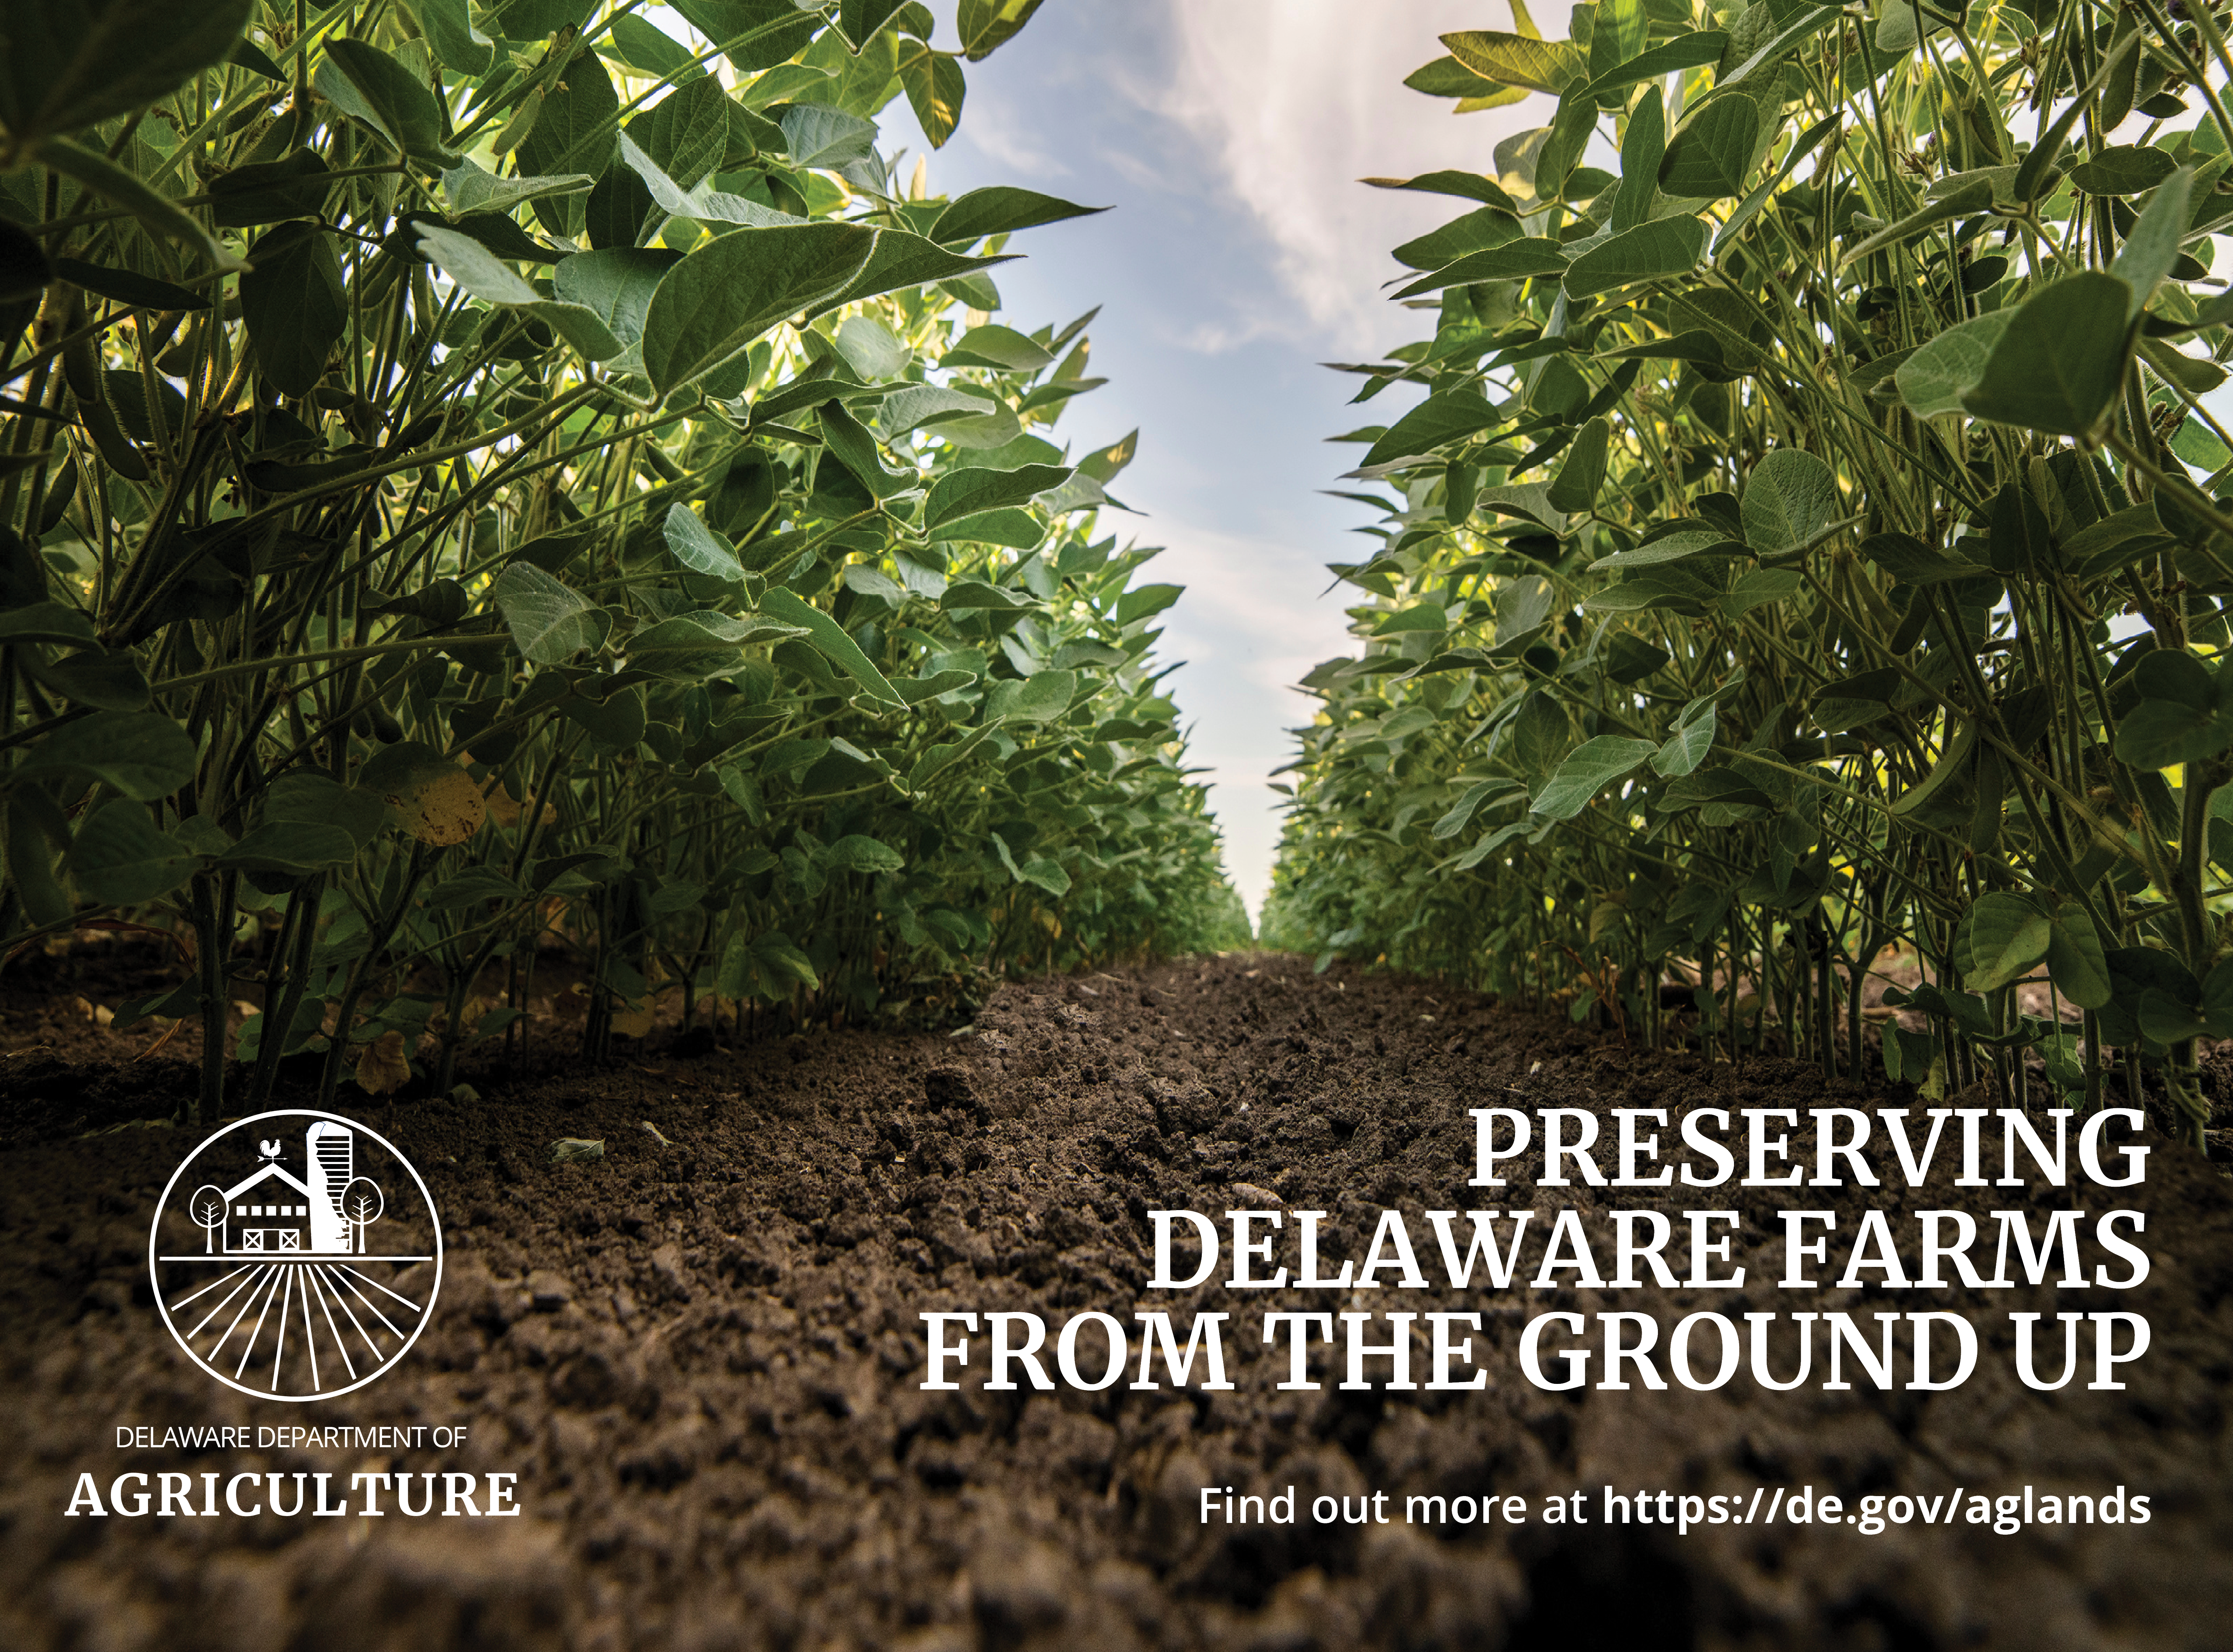 Looking down a row of soybeans with the Delaware Department of Agriculture logo, Text: Preserving Delaware Farms From the Ground Up, Find out more at https://de.gov/aglands